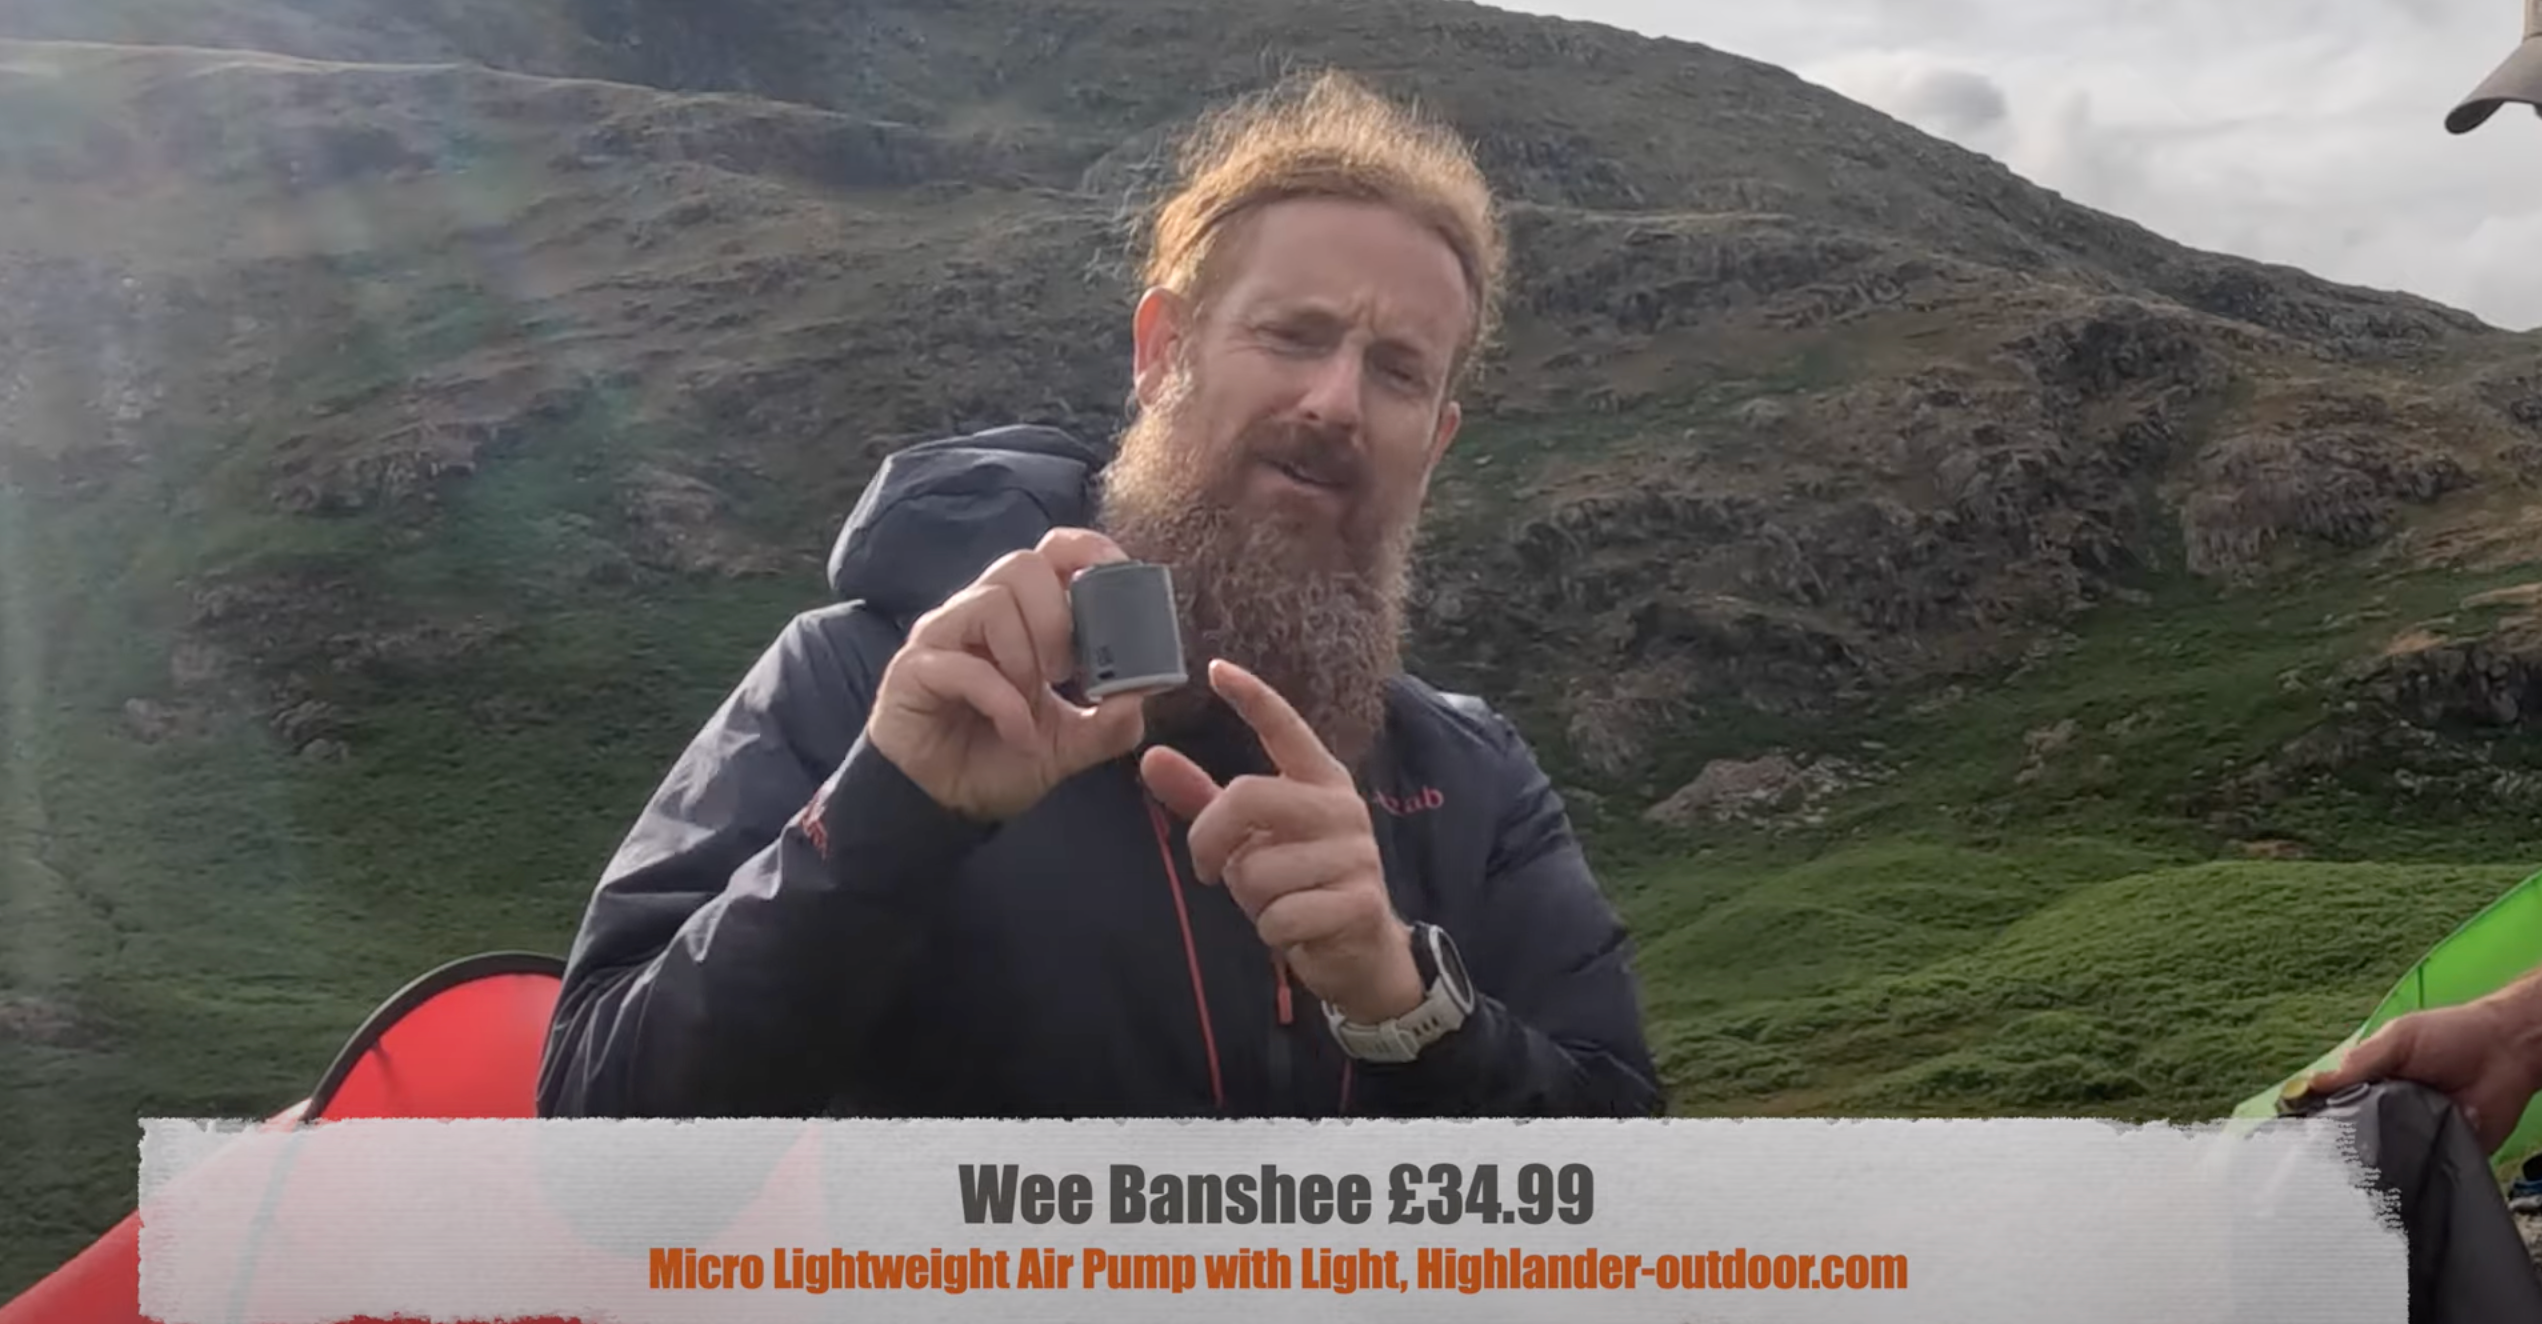 Wee Banshee Pump tested by Trail magazine